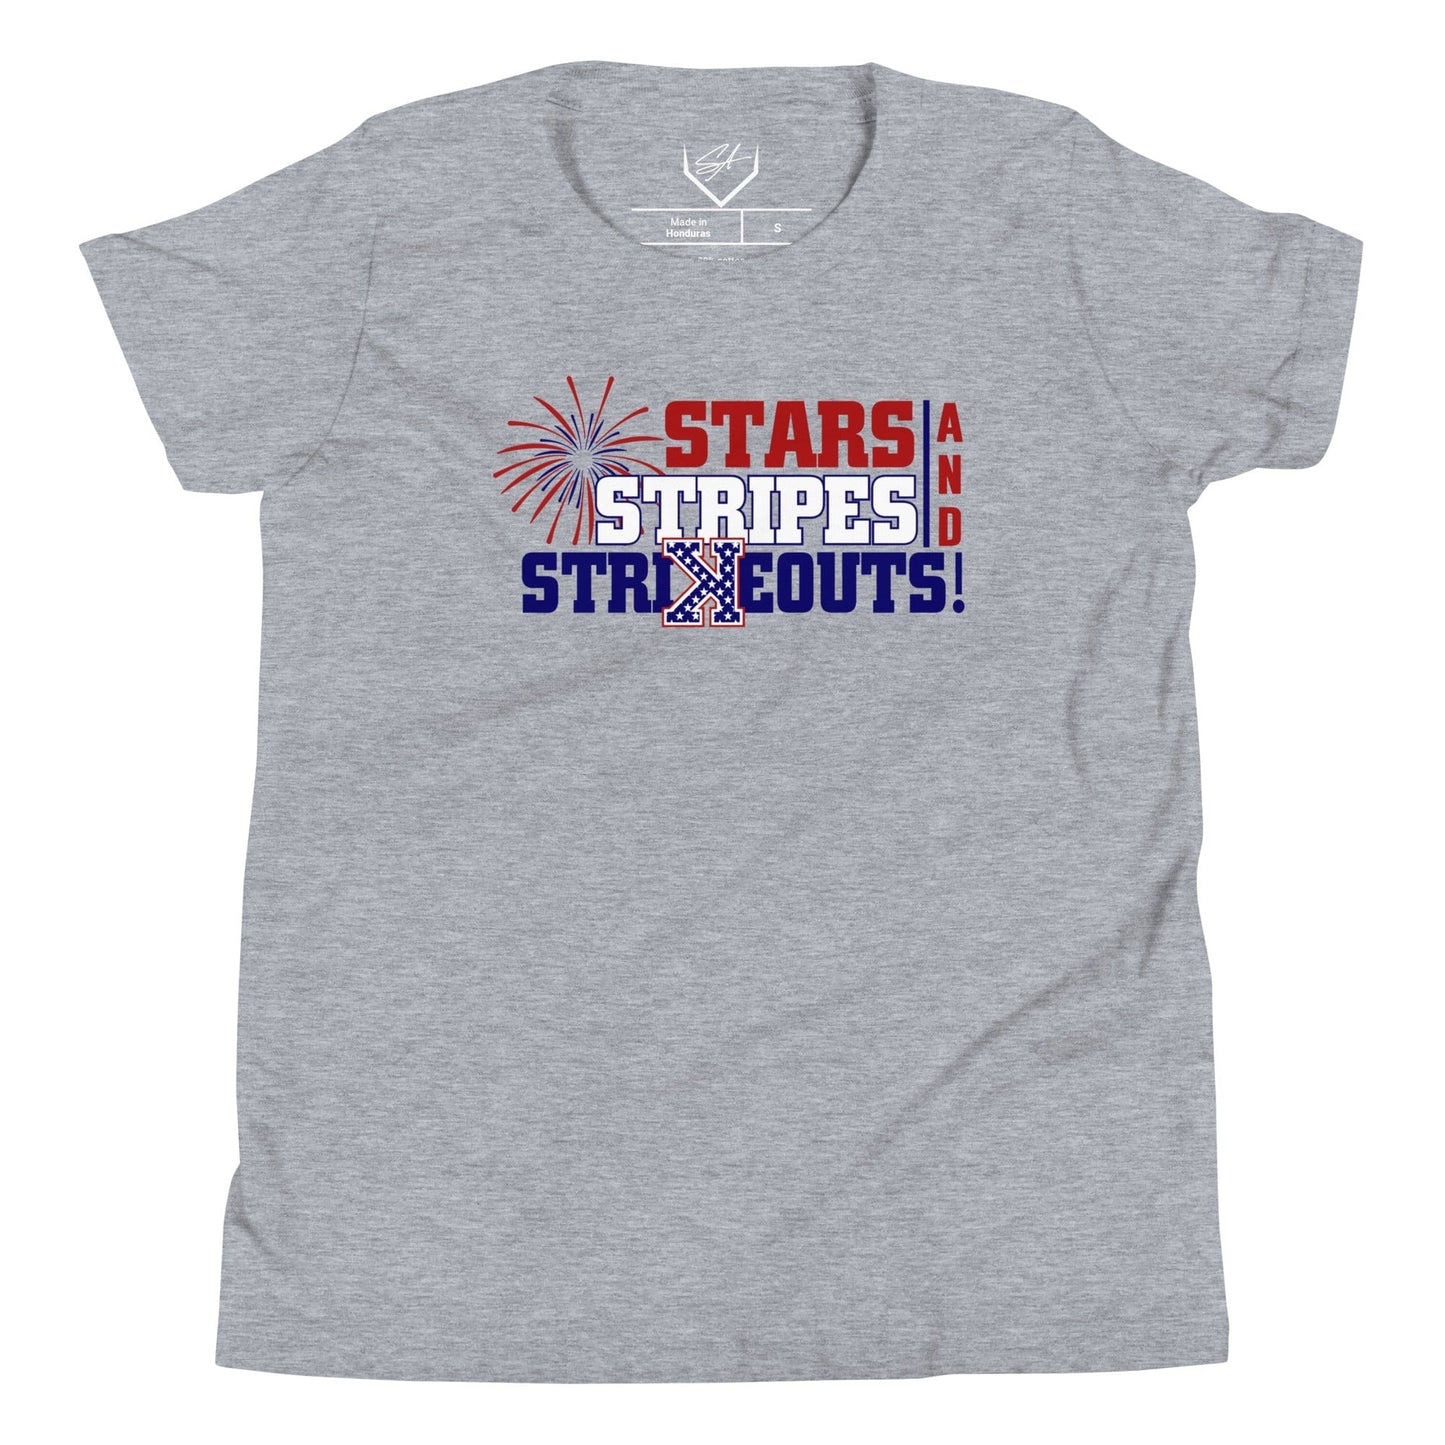 Stars, Stripes, & Strikeouts - Youth Tee